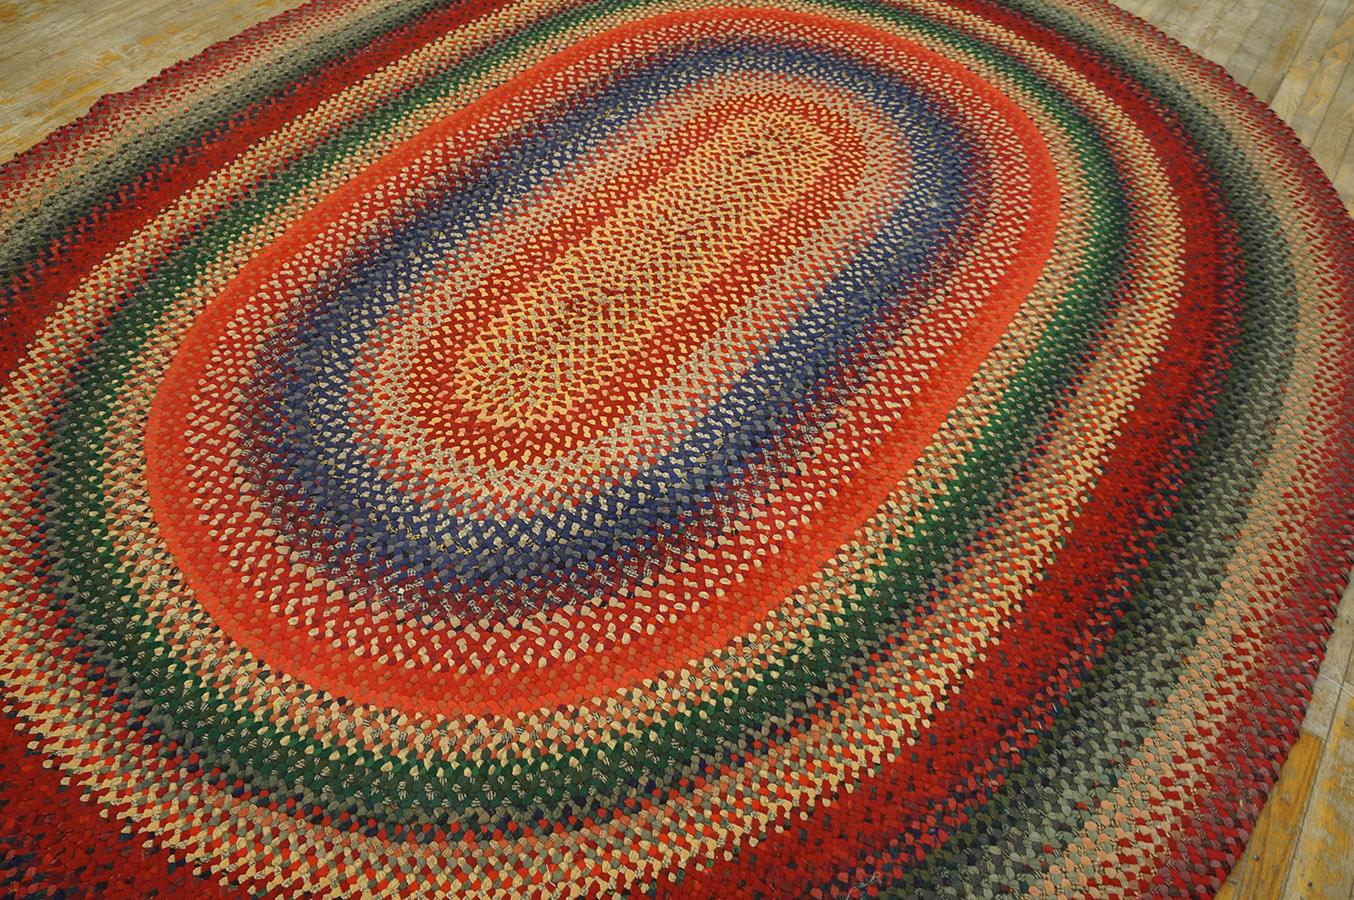 Country Early 20th Century Oval American Braided Rug ( 6'10